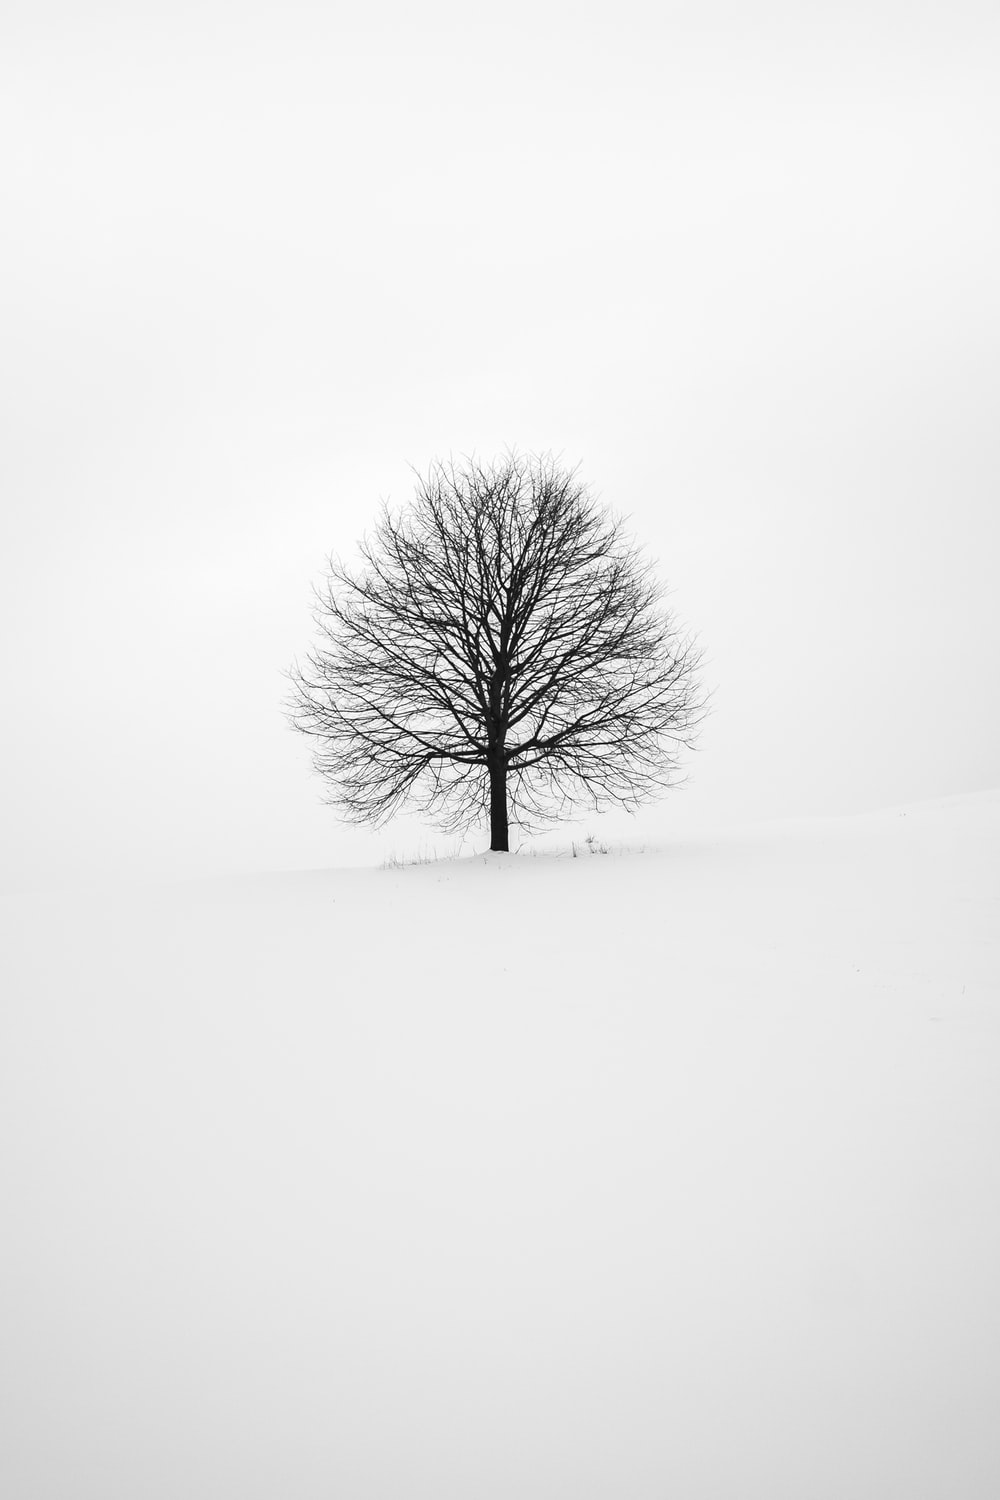 Black And White Wallpapers: Free HD Download [500+ HQ.